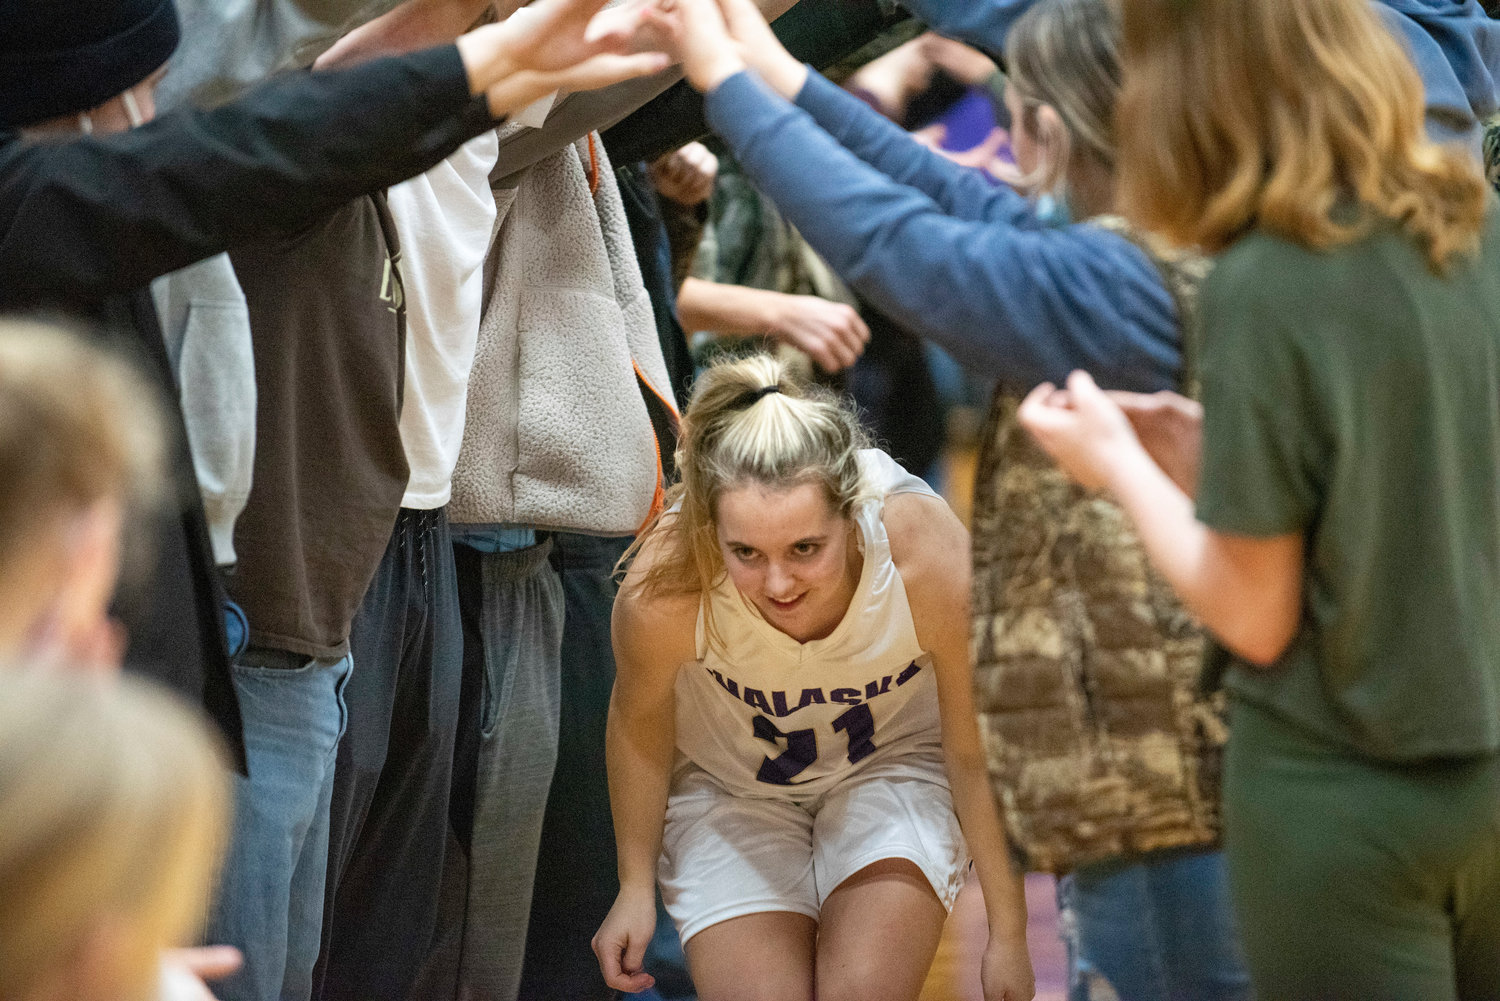 Onalaska's Callie Lawrence runs through a student-section tunnel during pre-game announcements on Jan. 20.